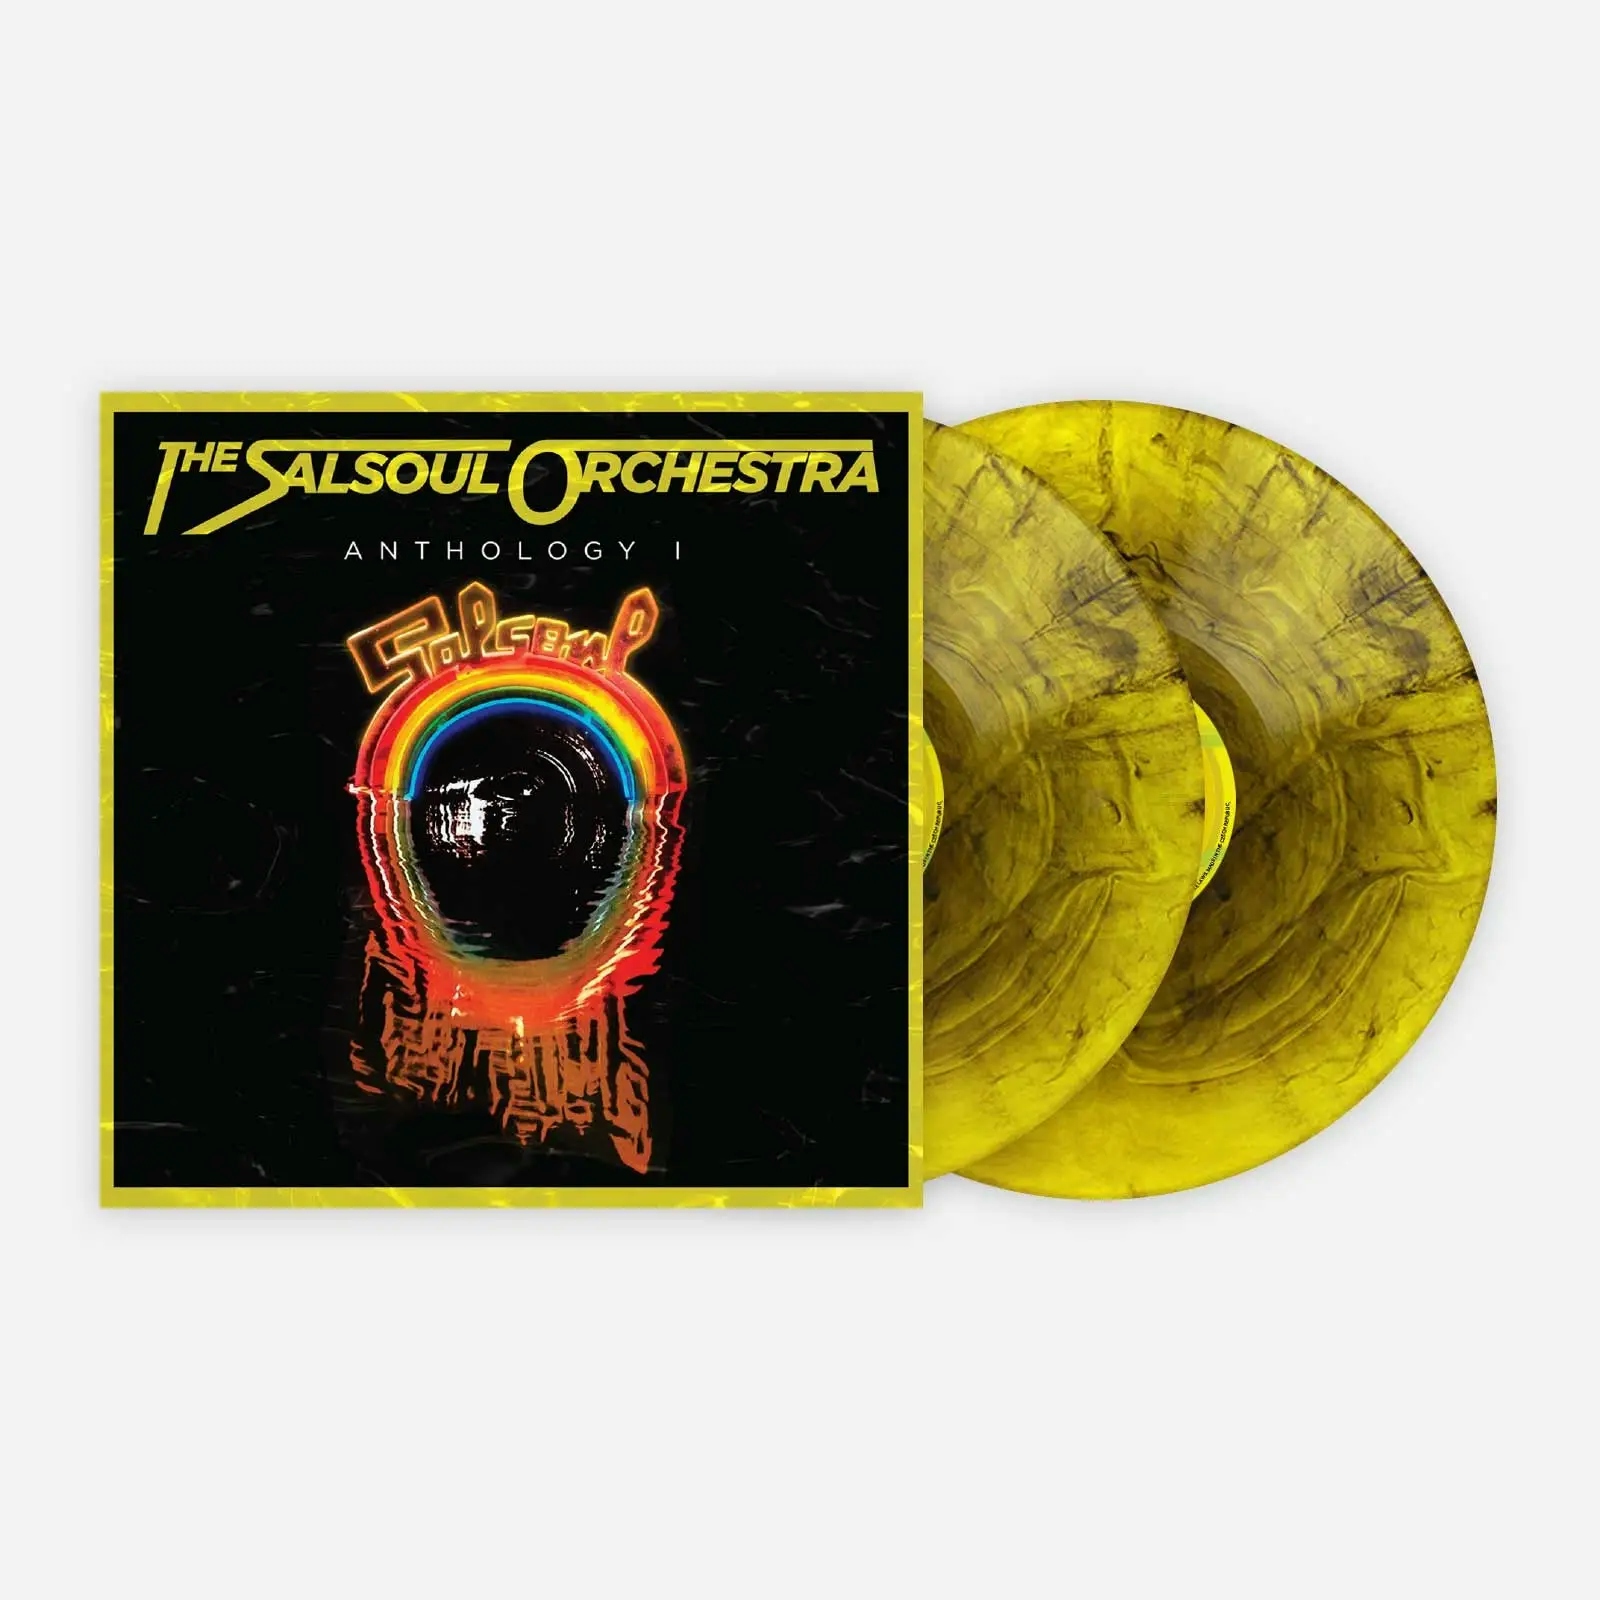 Album artwork for Anthology I by The Salsoul Orchestra